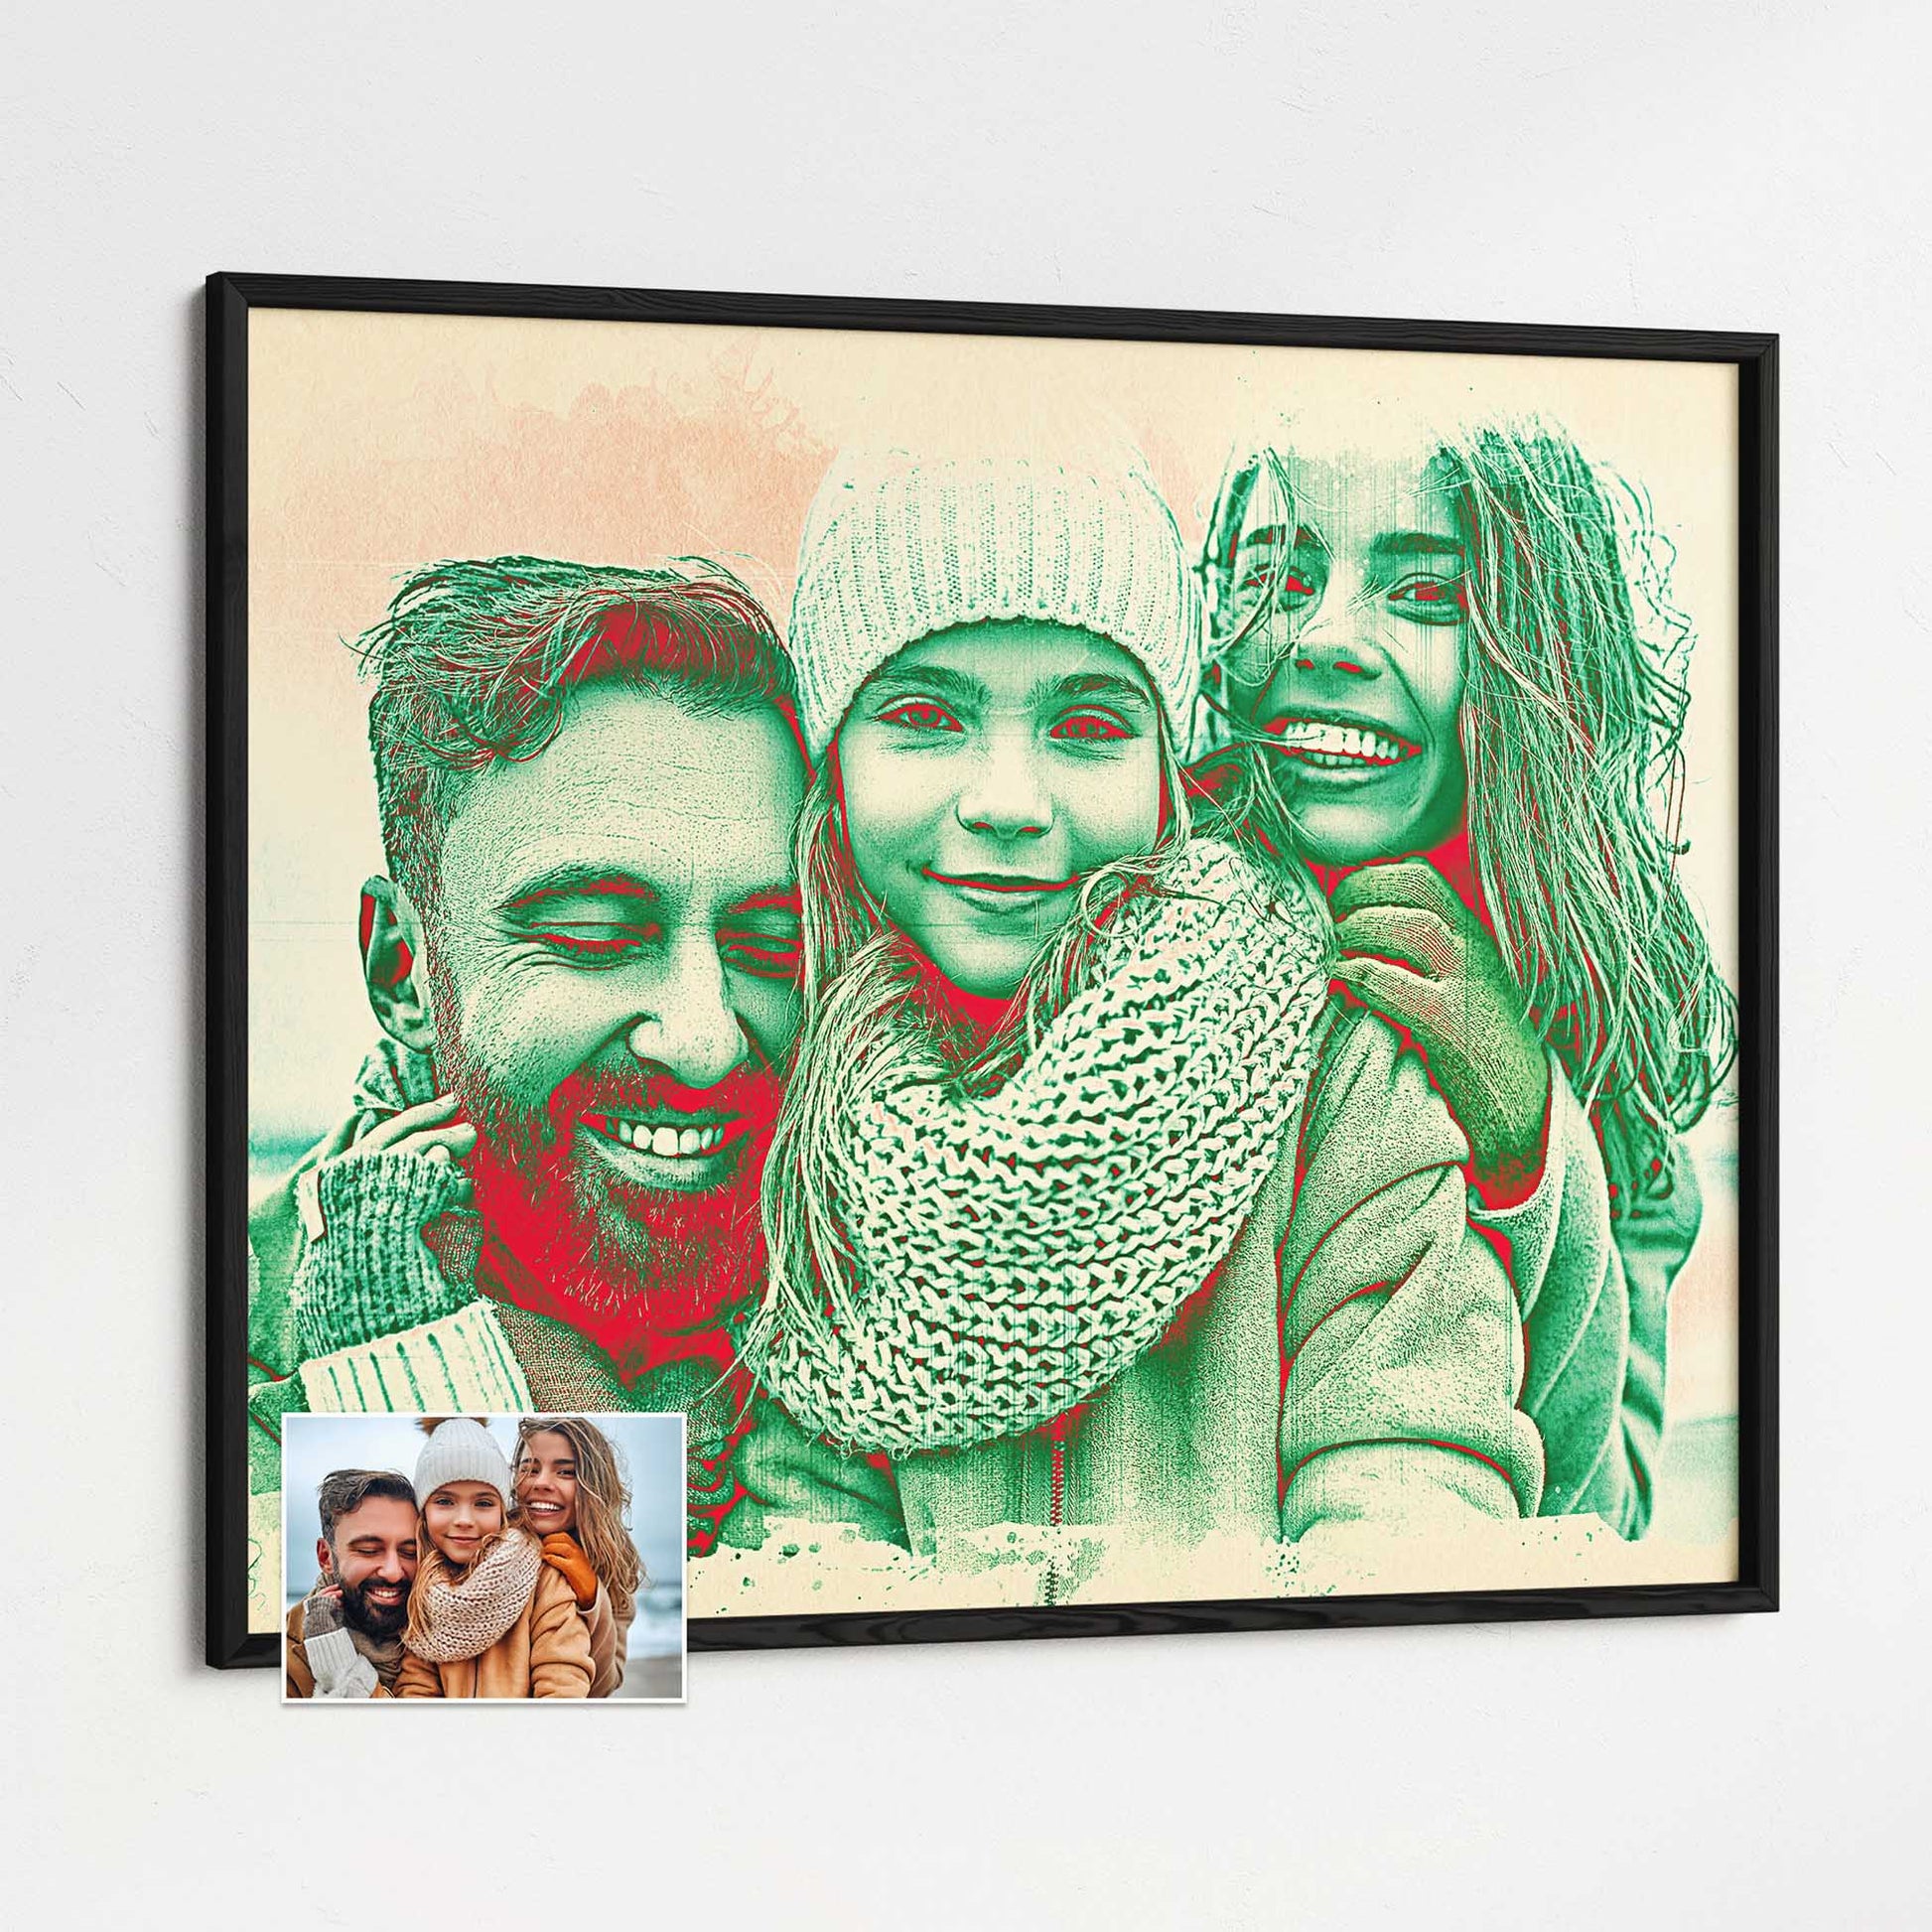 Personalised Red & Green Framed Print: Embrace the captivating beauty of watercolour style with this unique and imaginative framed print. Created from your photo, it transforms your memories into a stunning piece of art